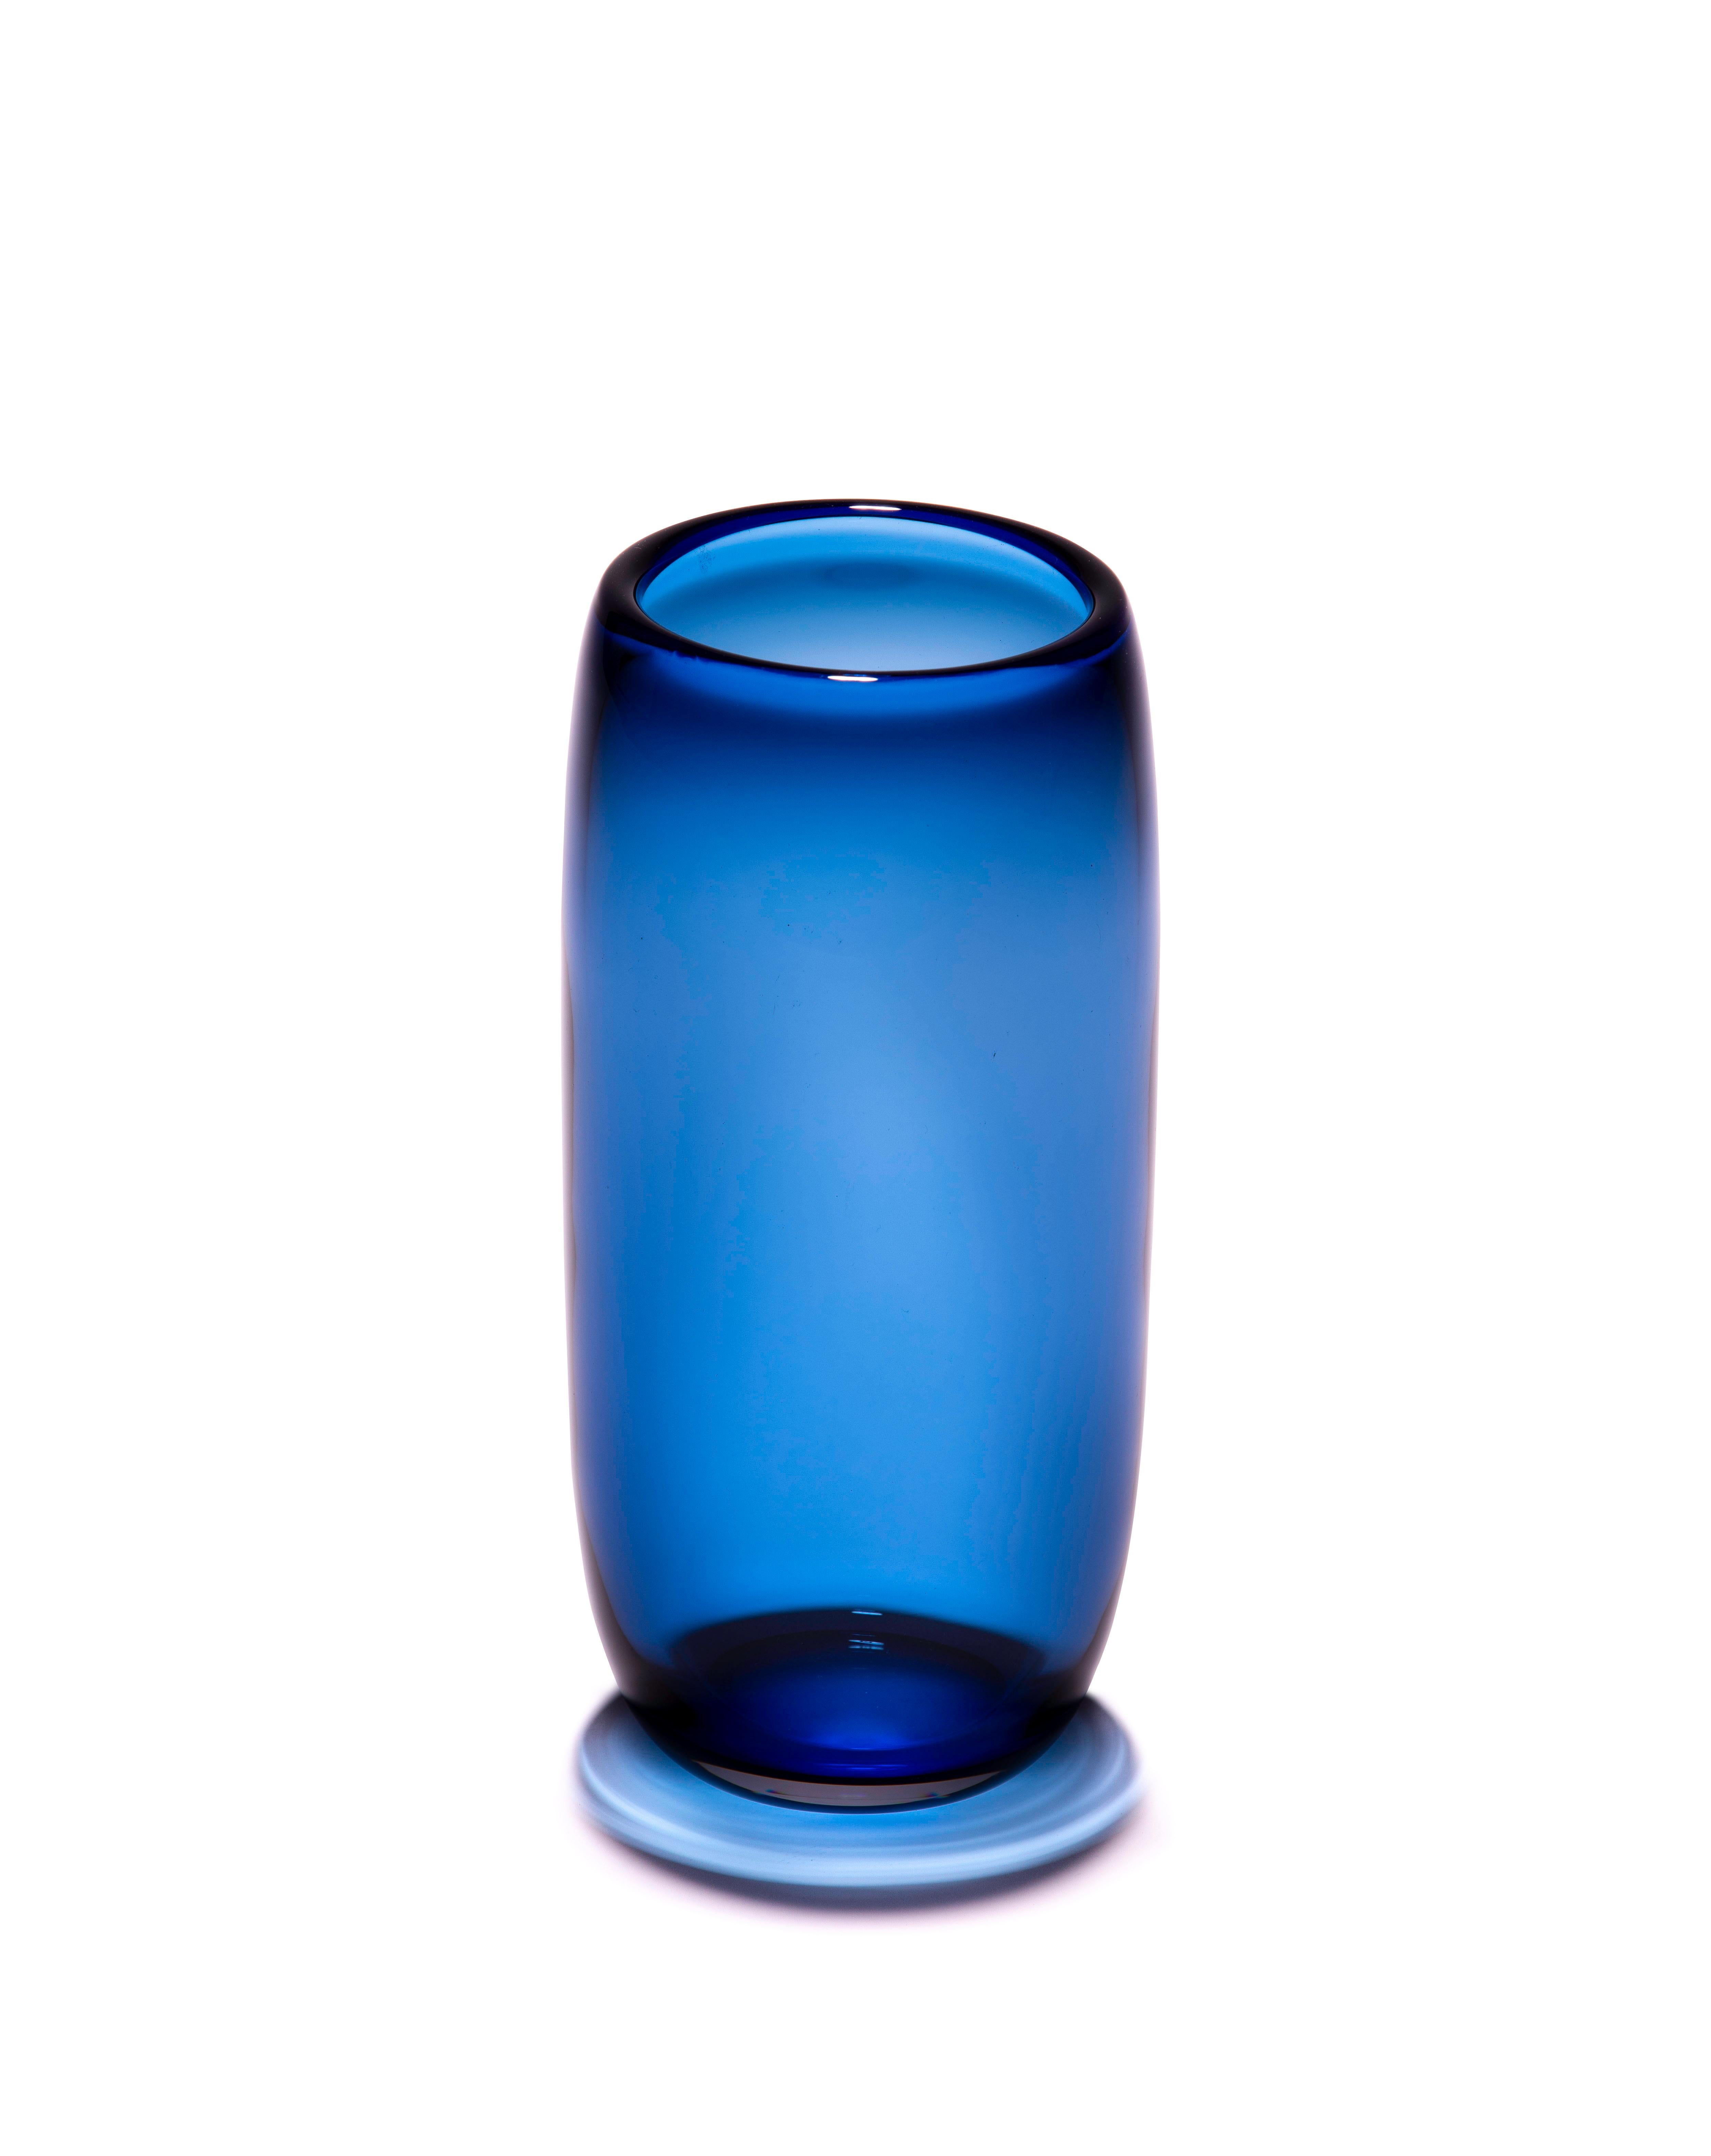 Unique Harvest Graal Blue and Black Glass Vase by Tiina Sarapu 6